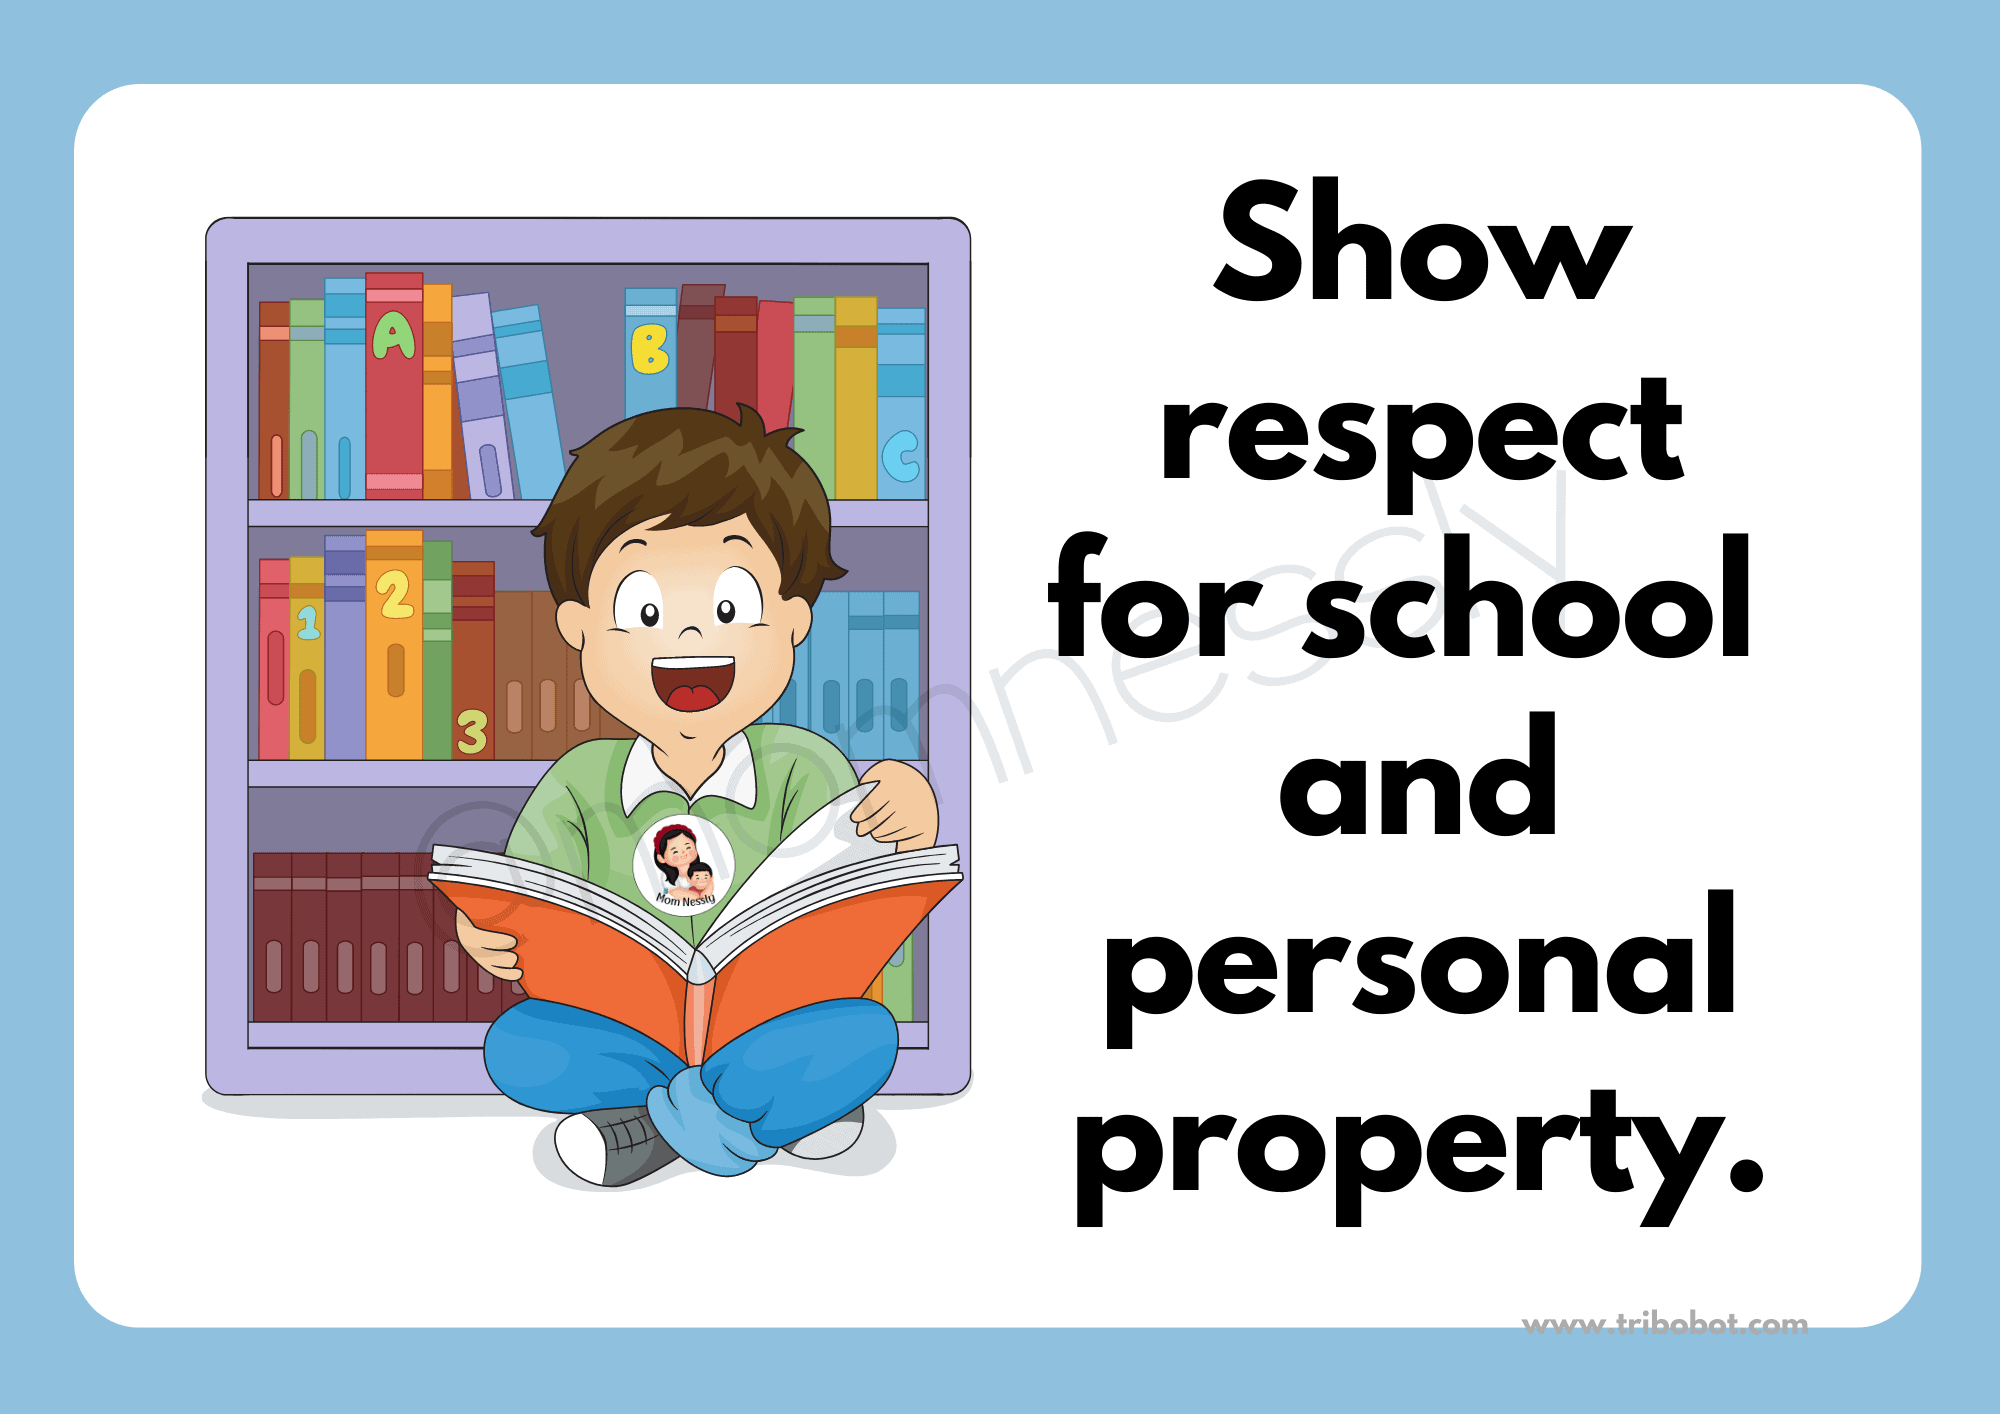 Class Rules Posters